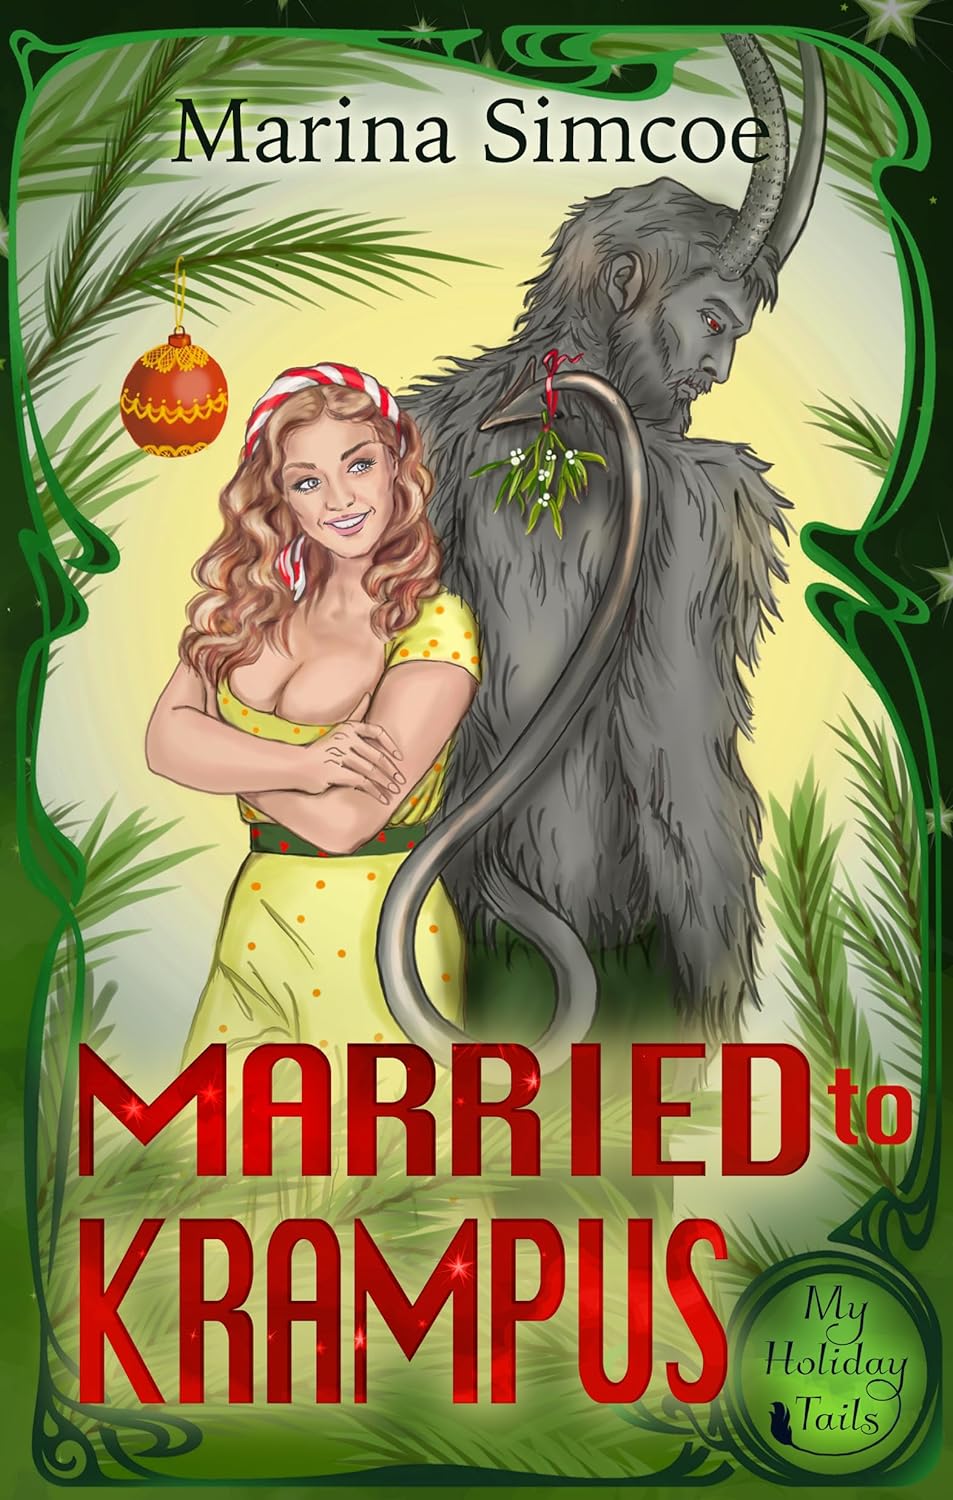 Married to Krampus by Marina Simcoe